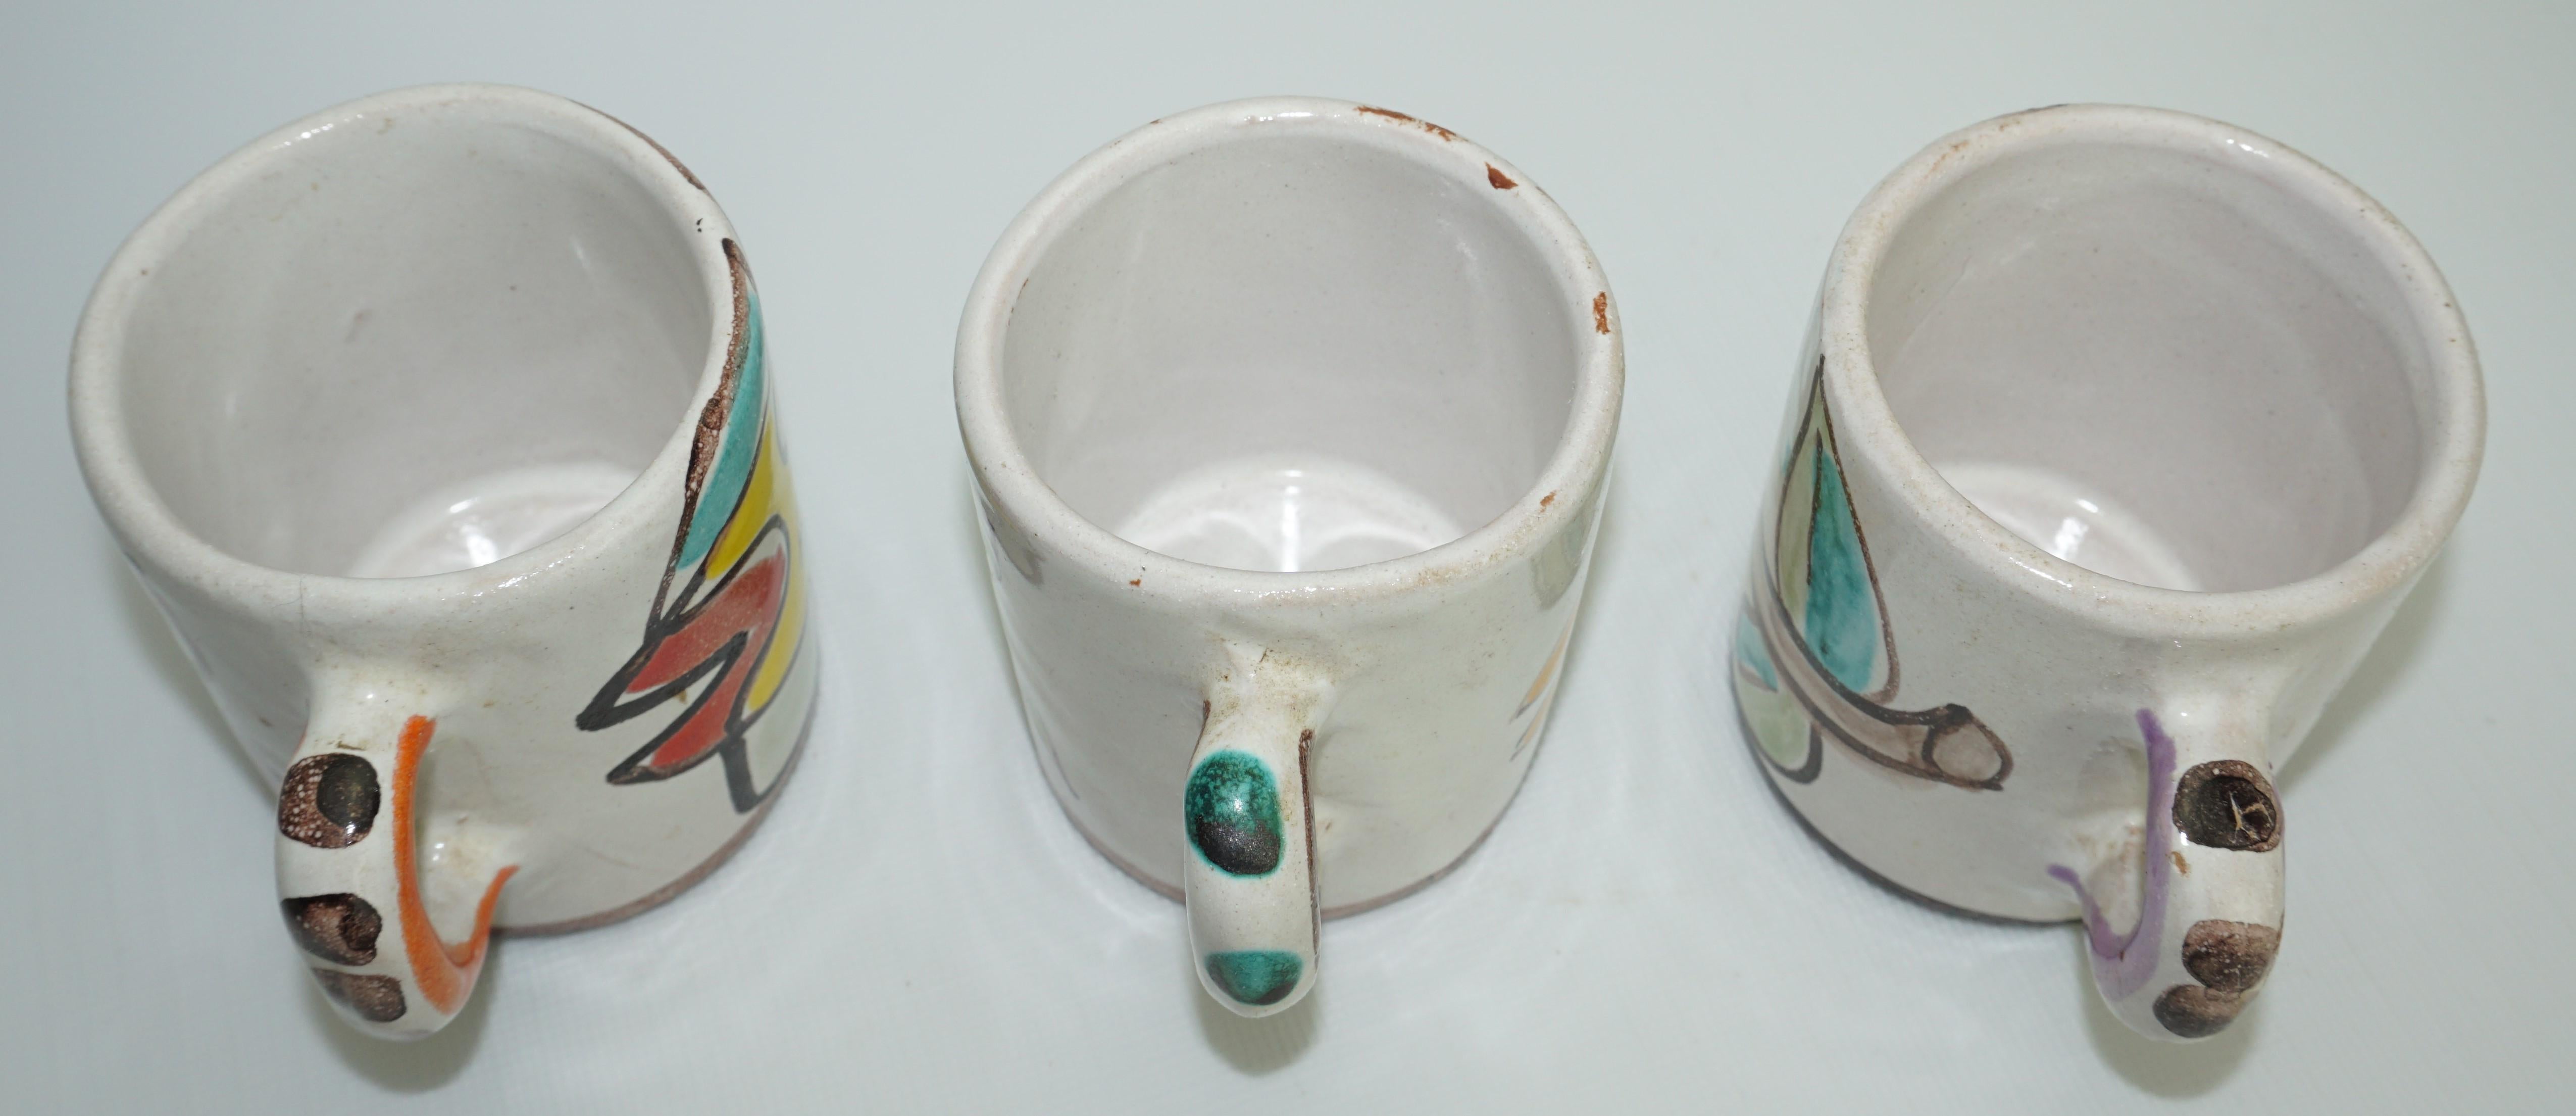 Hand-Crafted Cups by Giovanni DeSimone, Italy, C 1960, Expresso Cups